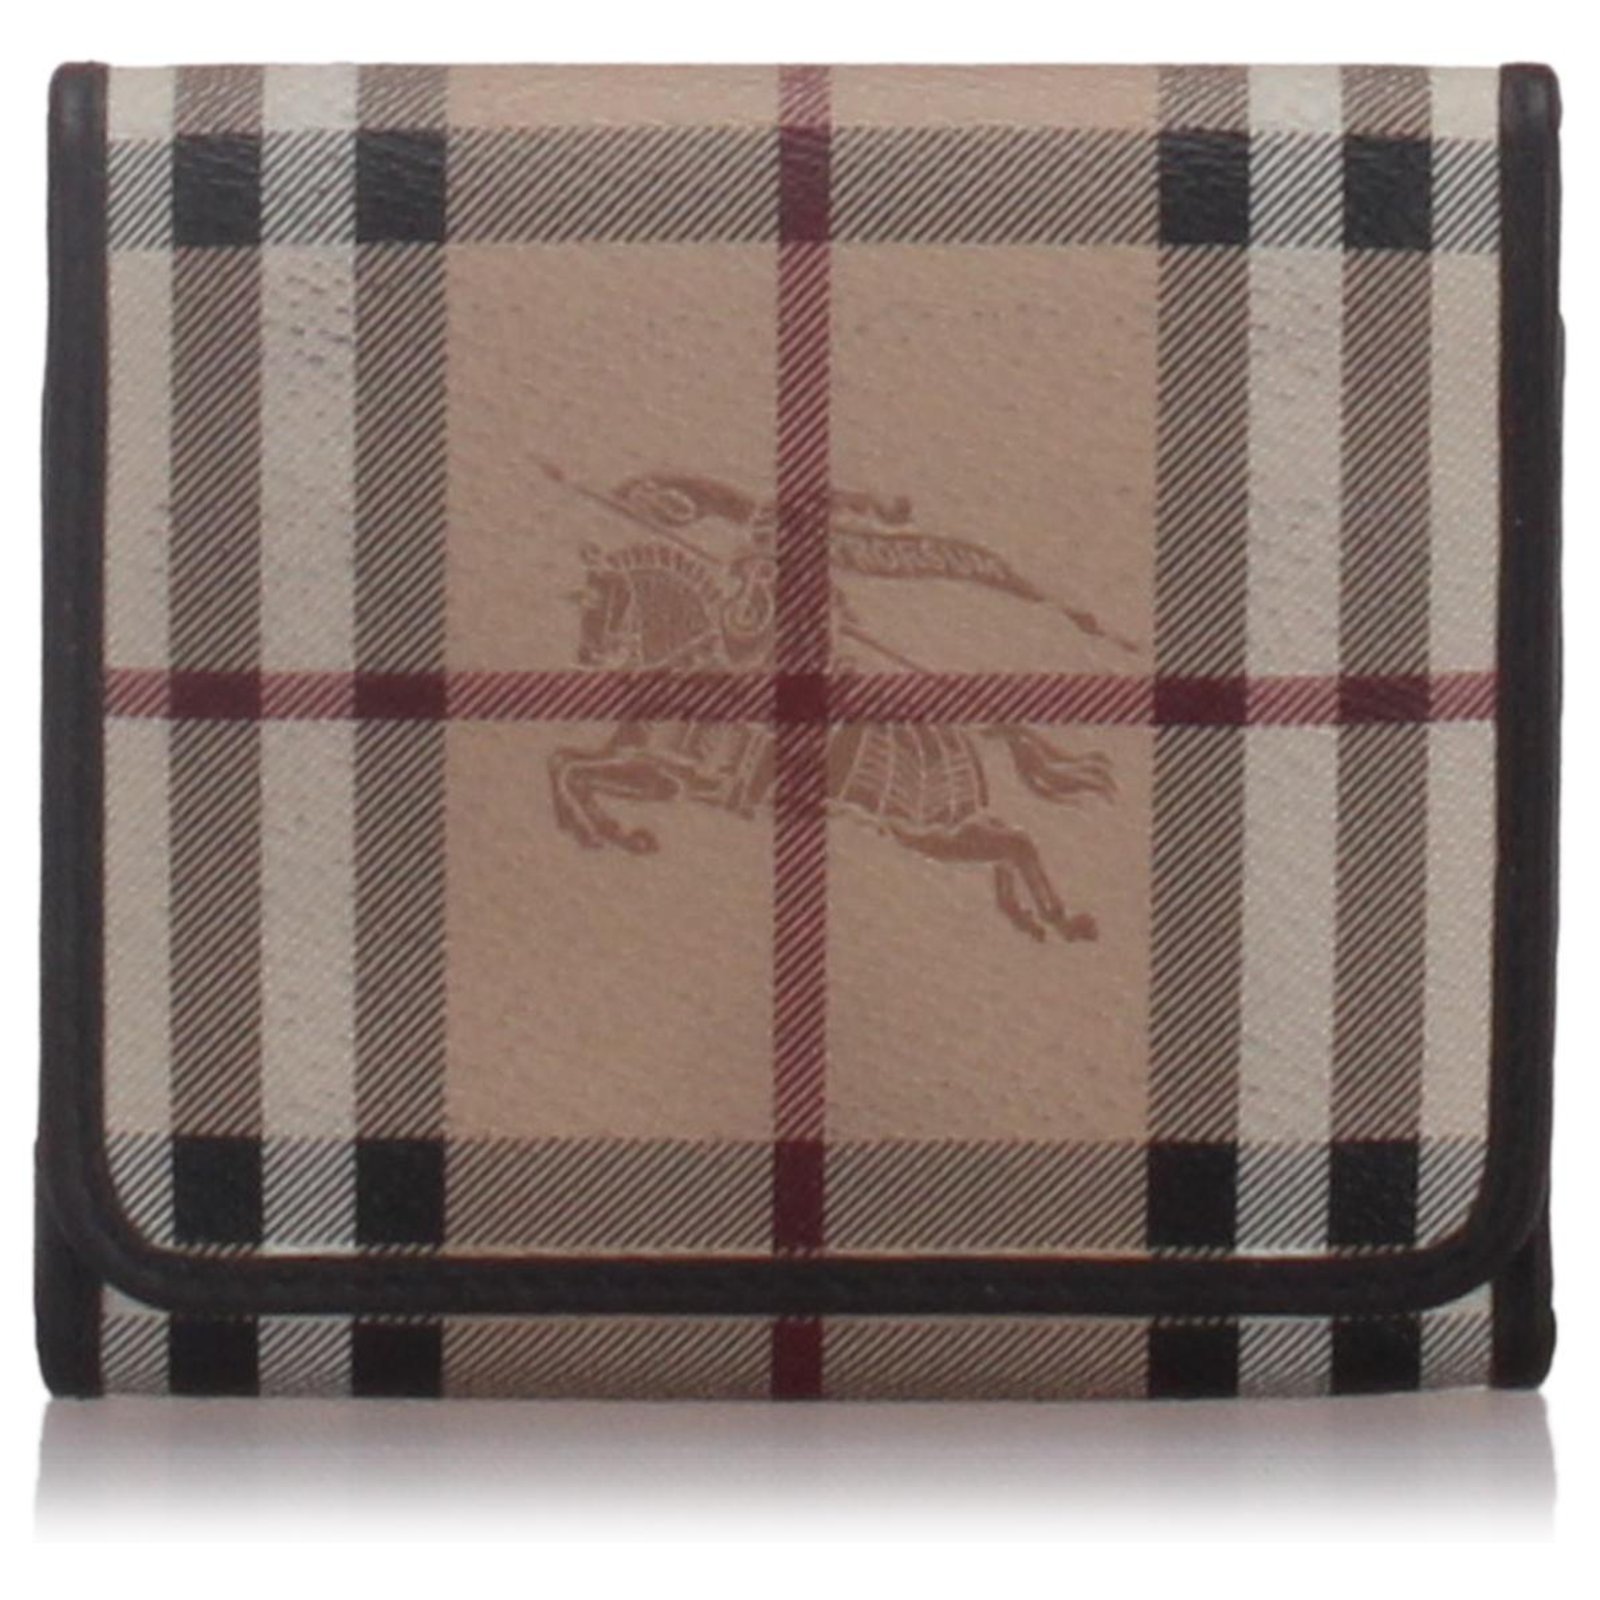 burberry small wallet